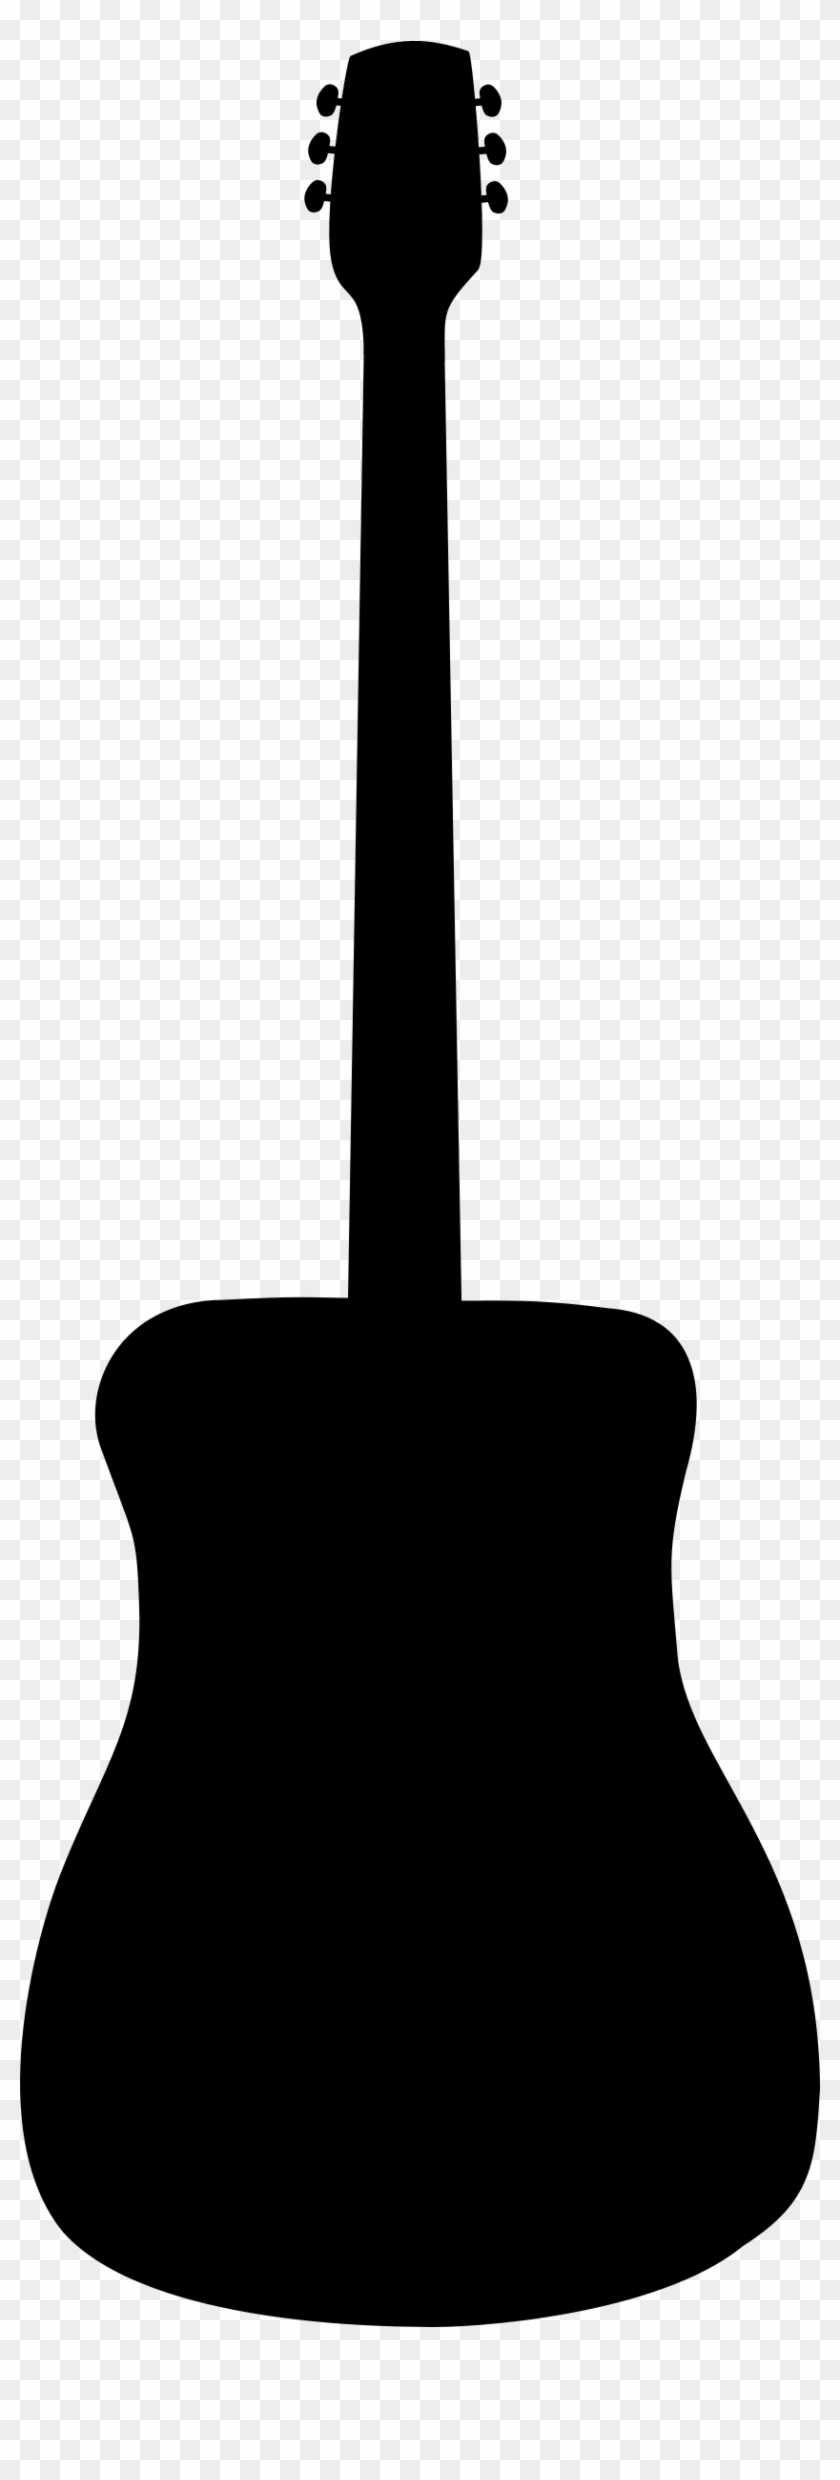 Guitar Black And White Guitar Black And White Clipart - Guitar Silhouette Vector Png #70555